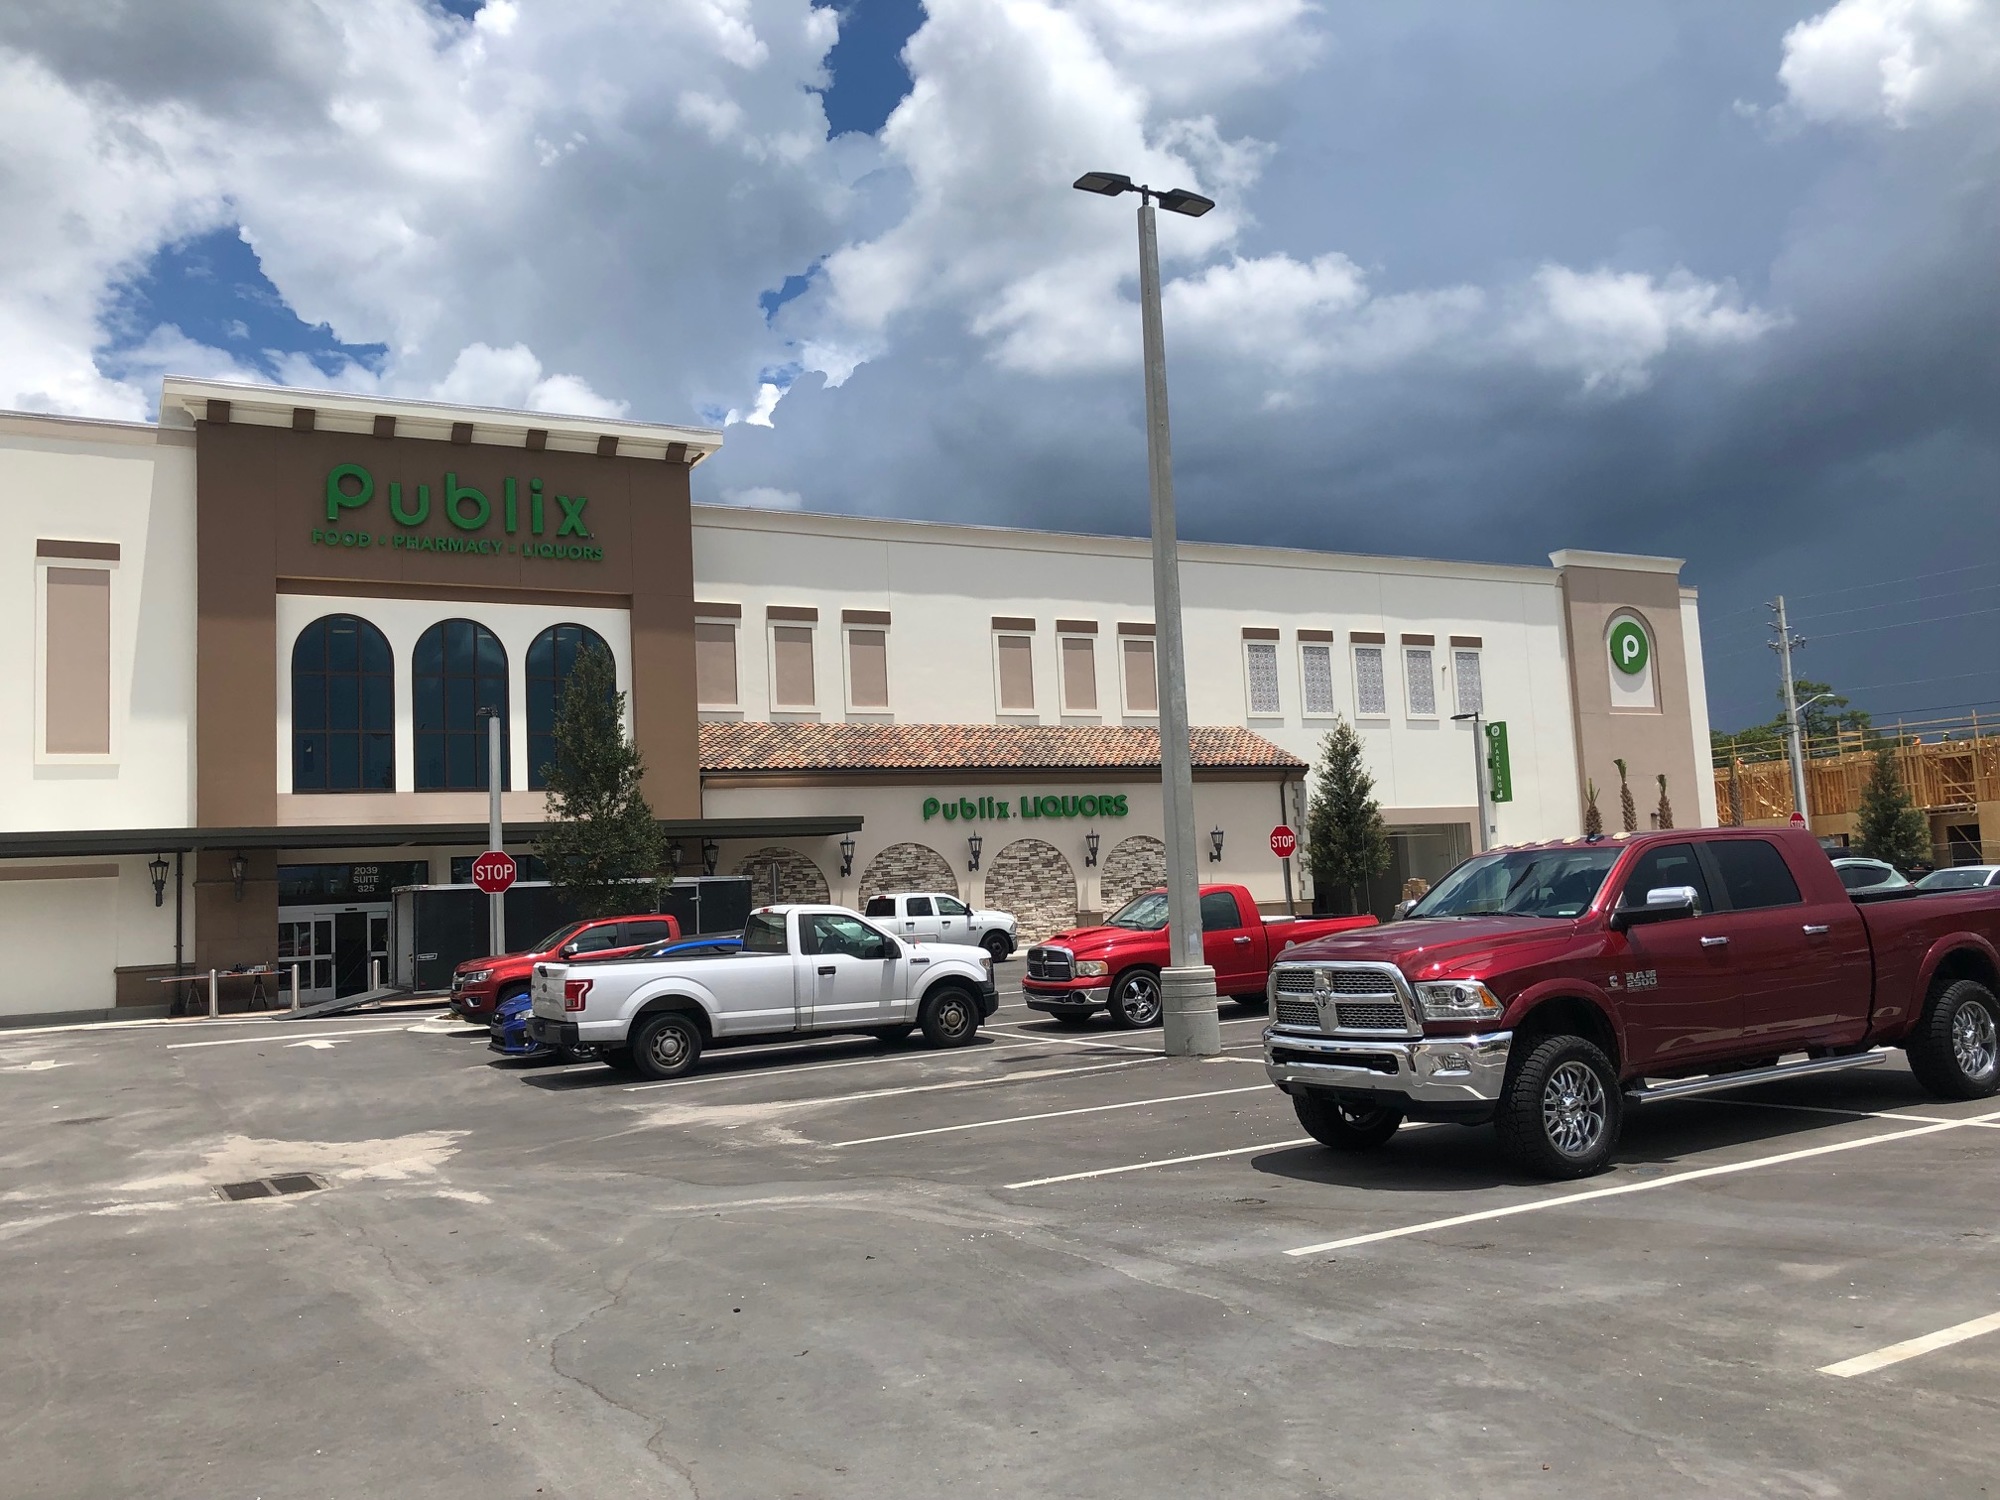 The new Publix will also have a liquor store.